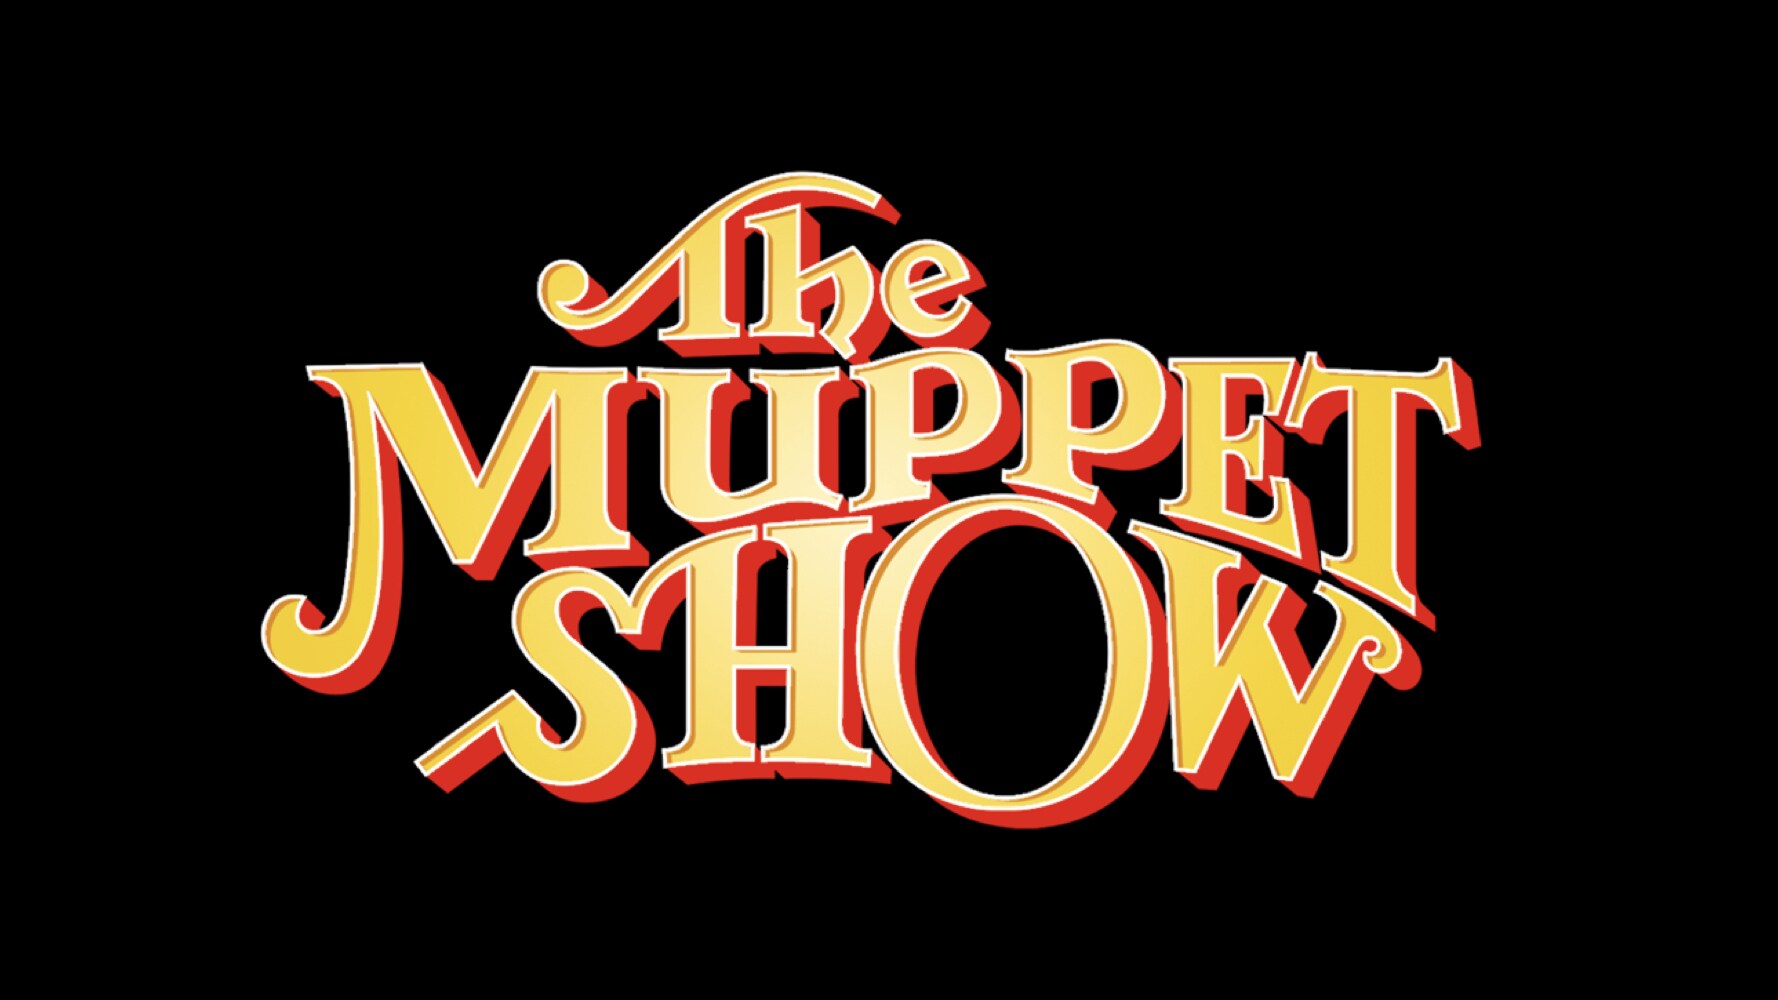 Play The Music And Light The Lights: “The Muppet Show” Streams February 19 Only On Disney+